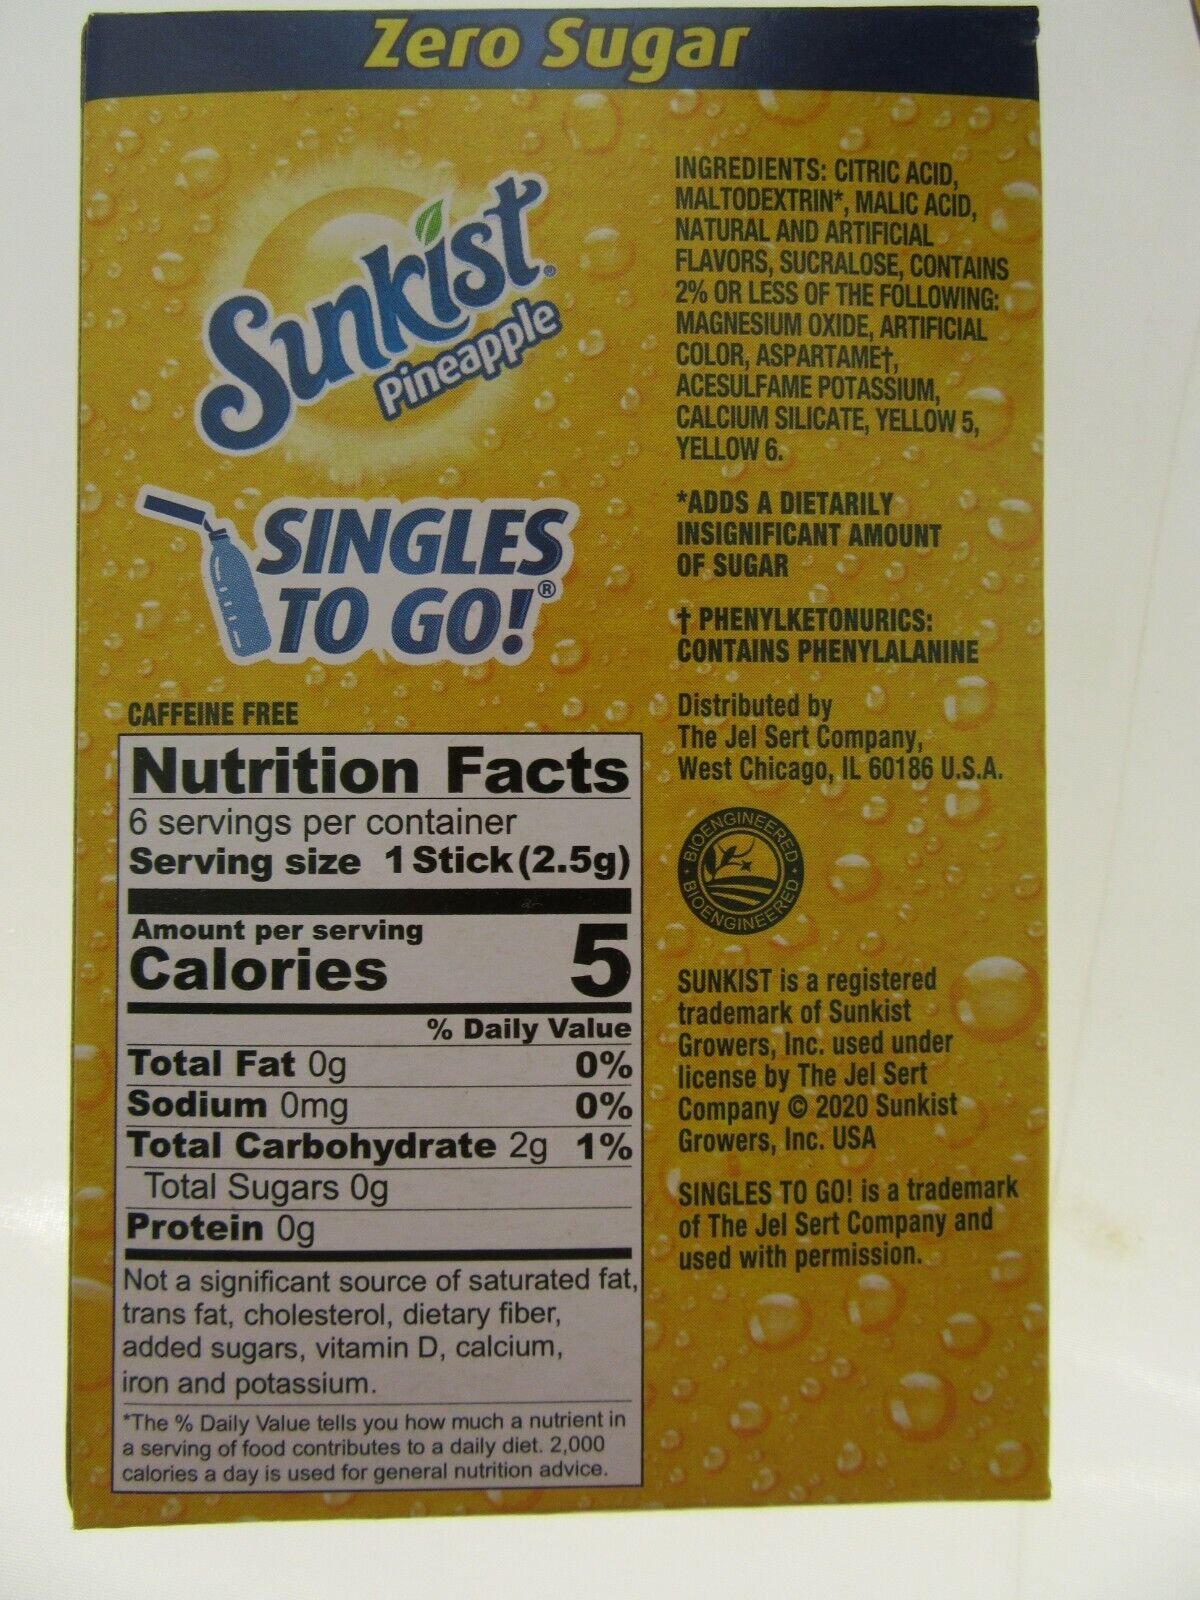 Sunkist Pineapple ~ Packets ~ Zero Sugar Free ~ Drink Mix ~ 3 Boxes